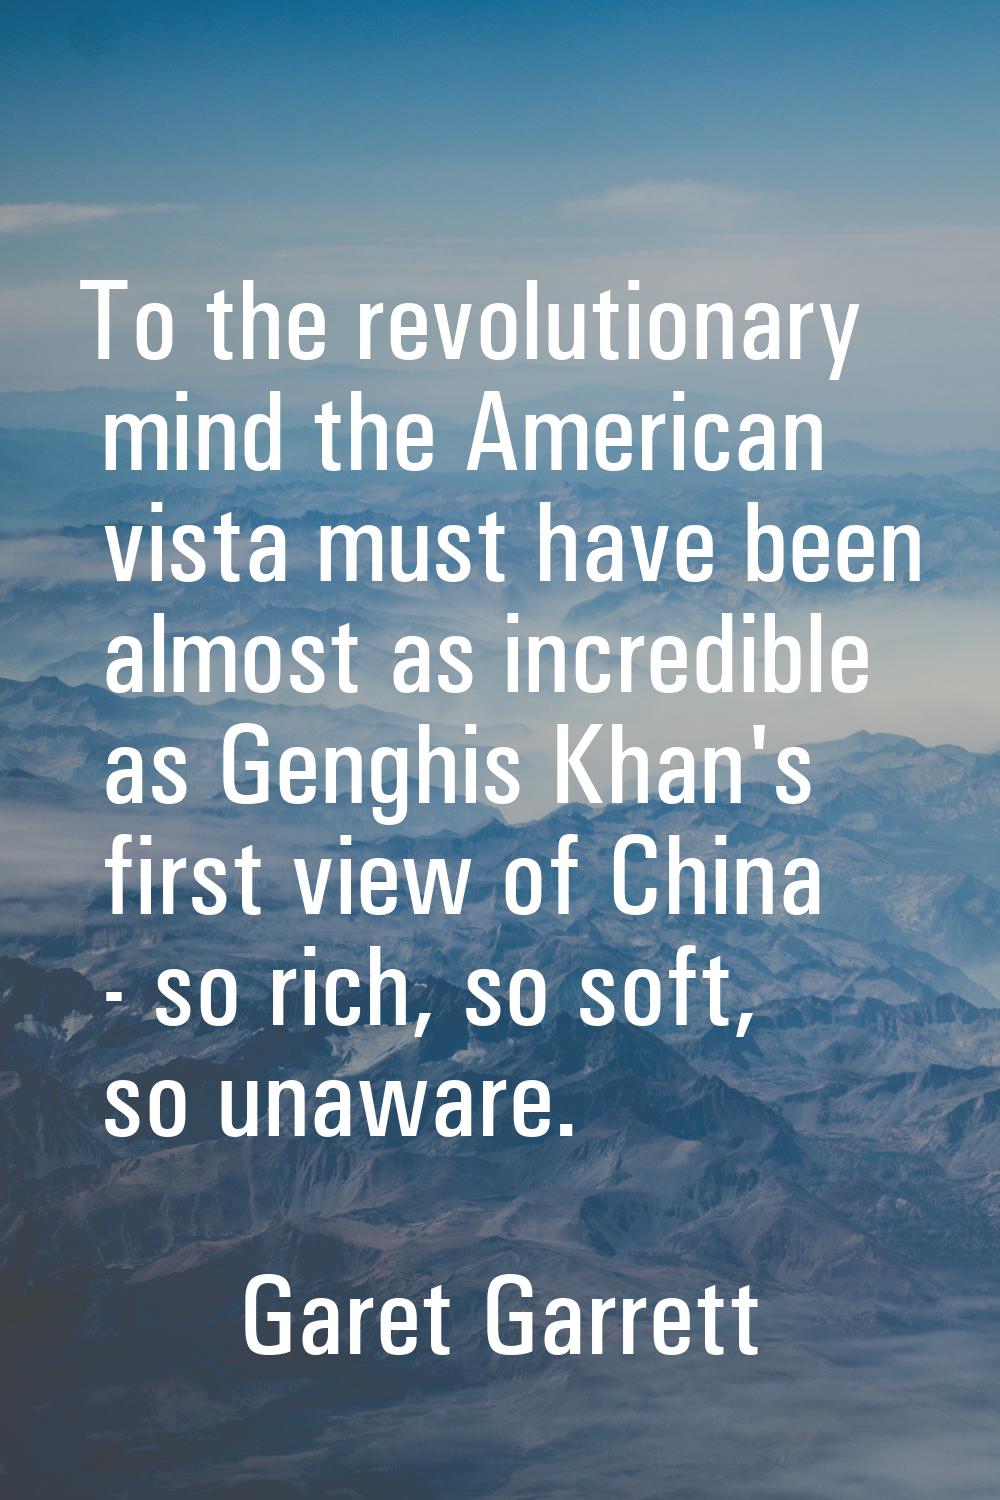 To the revolutionary mind the American vista must have been almost as incredible as Genghis Khan's 